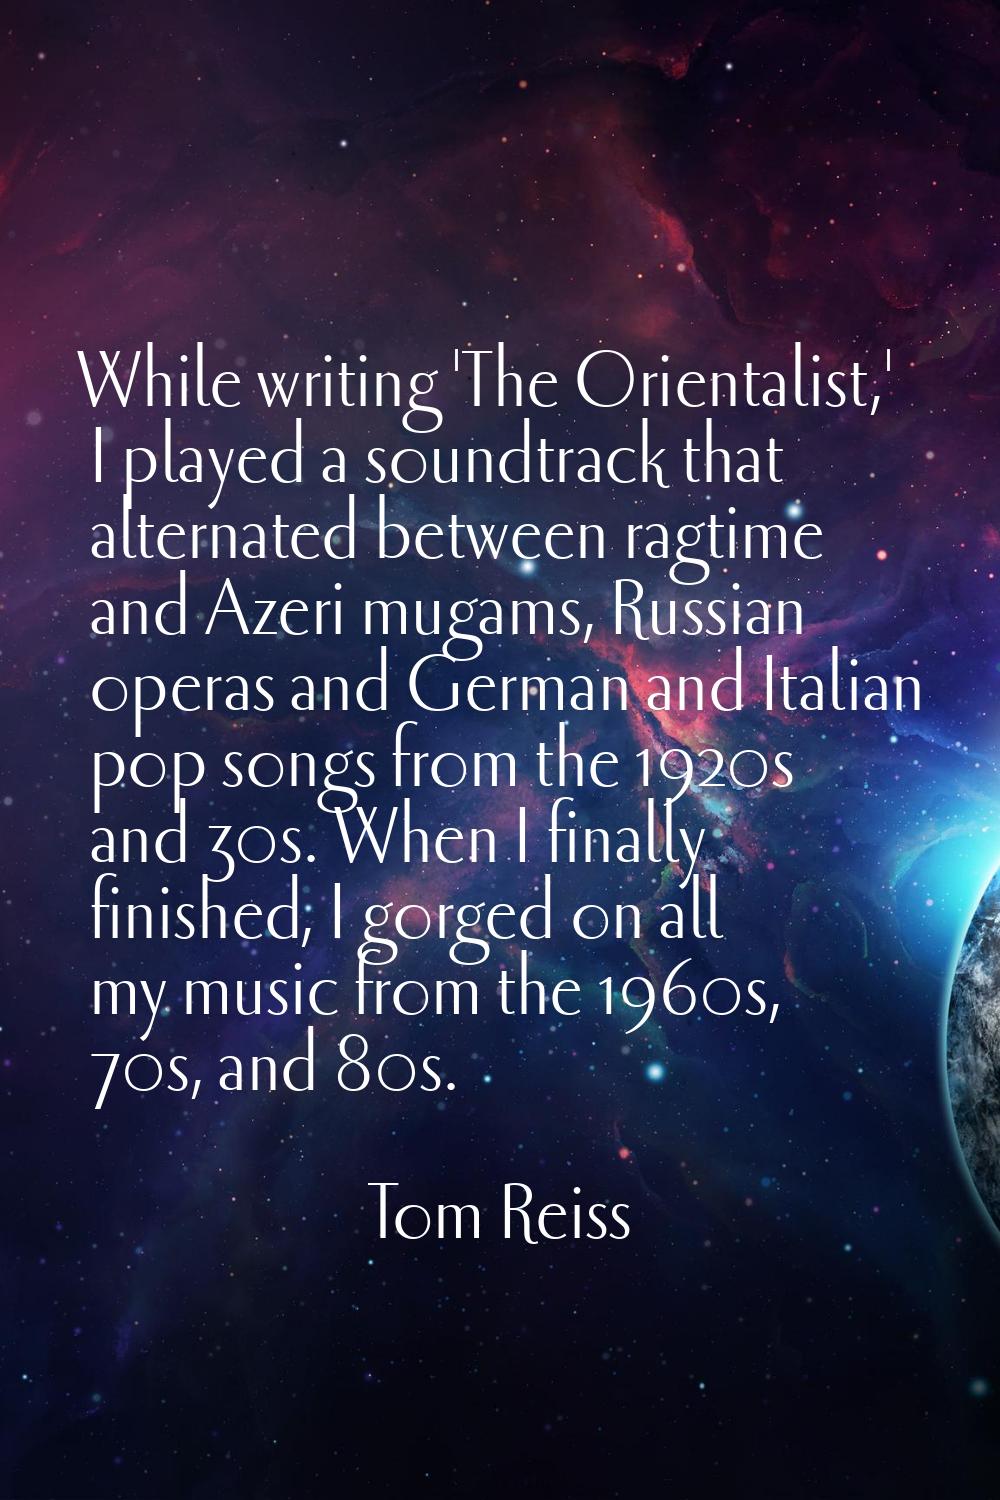 While writing 'The Orientalist,' I played a soundtrack that alternated between ragtime and Azeri mu